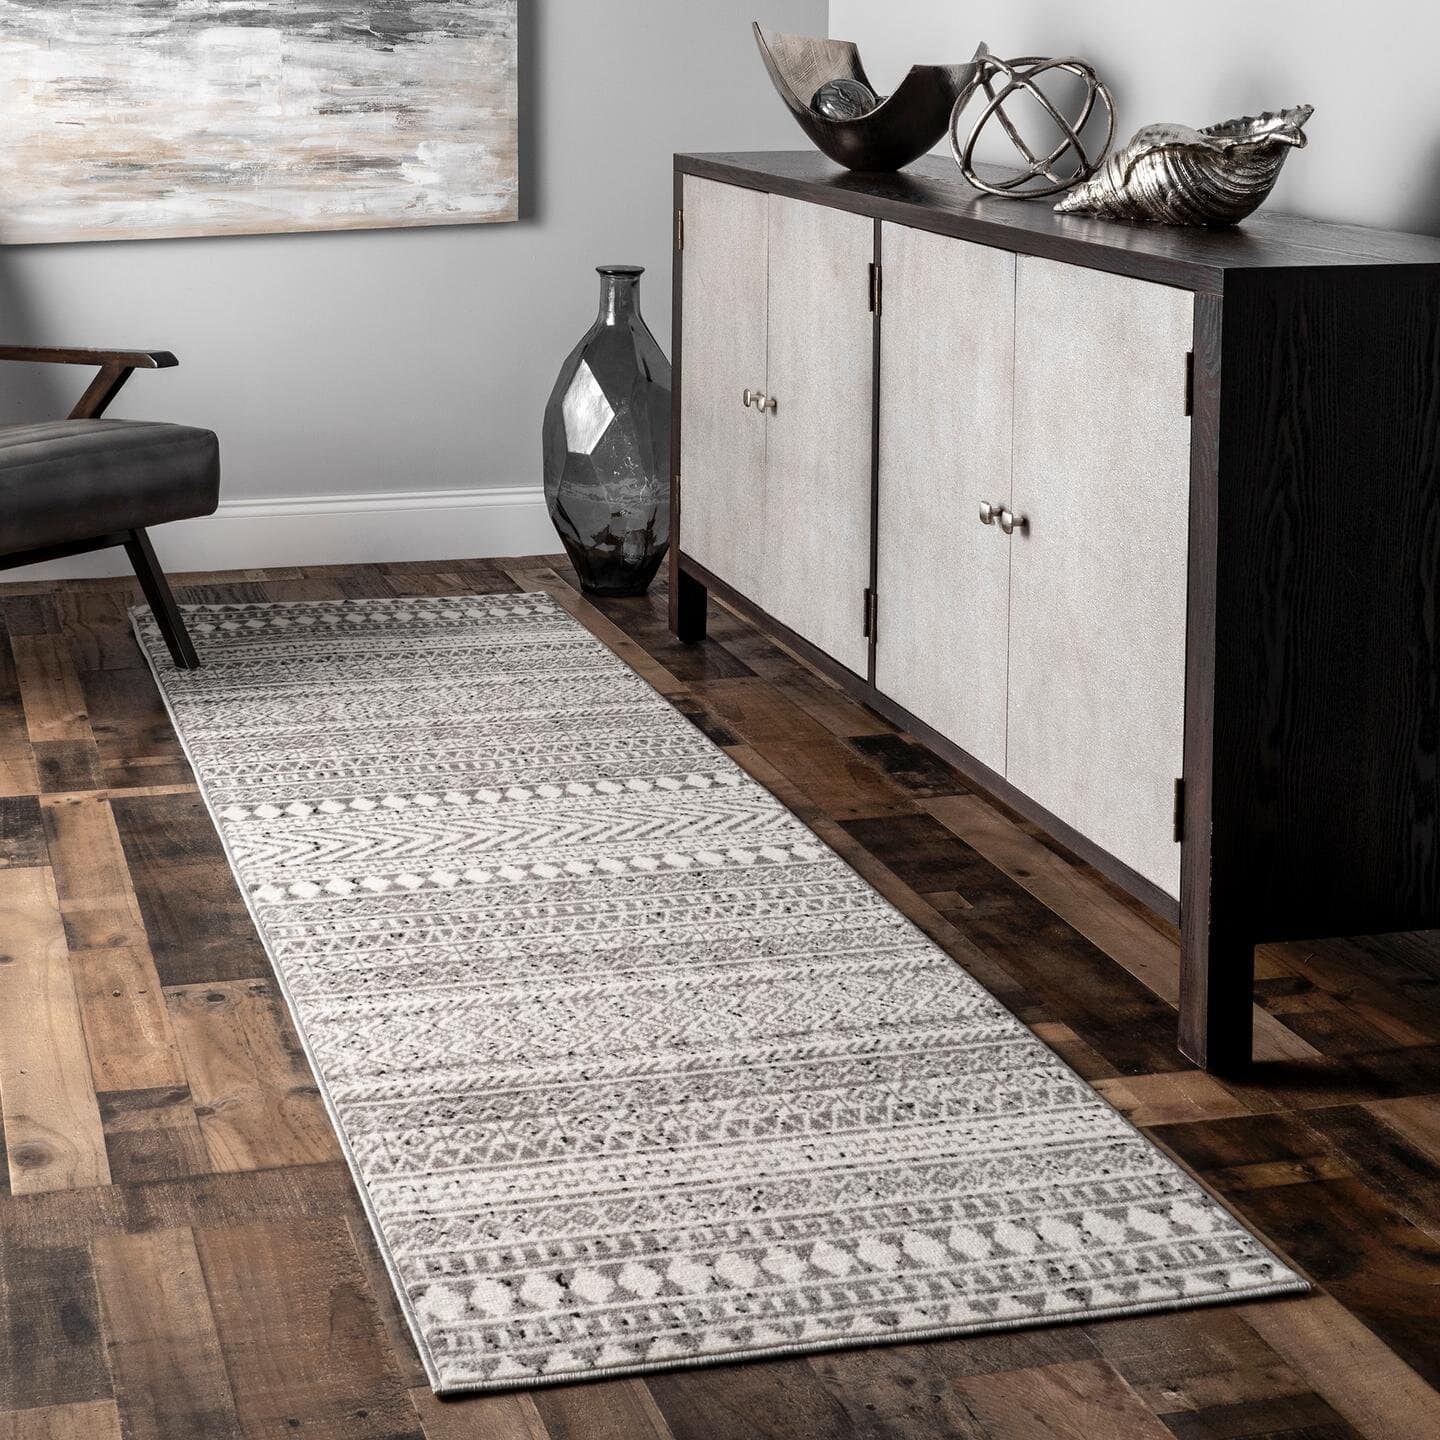 Use This Rug for a Modern Southwestern Touch